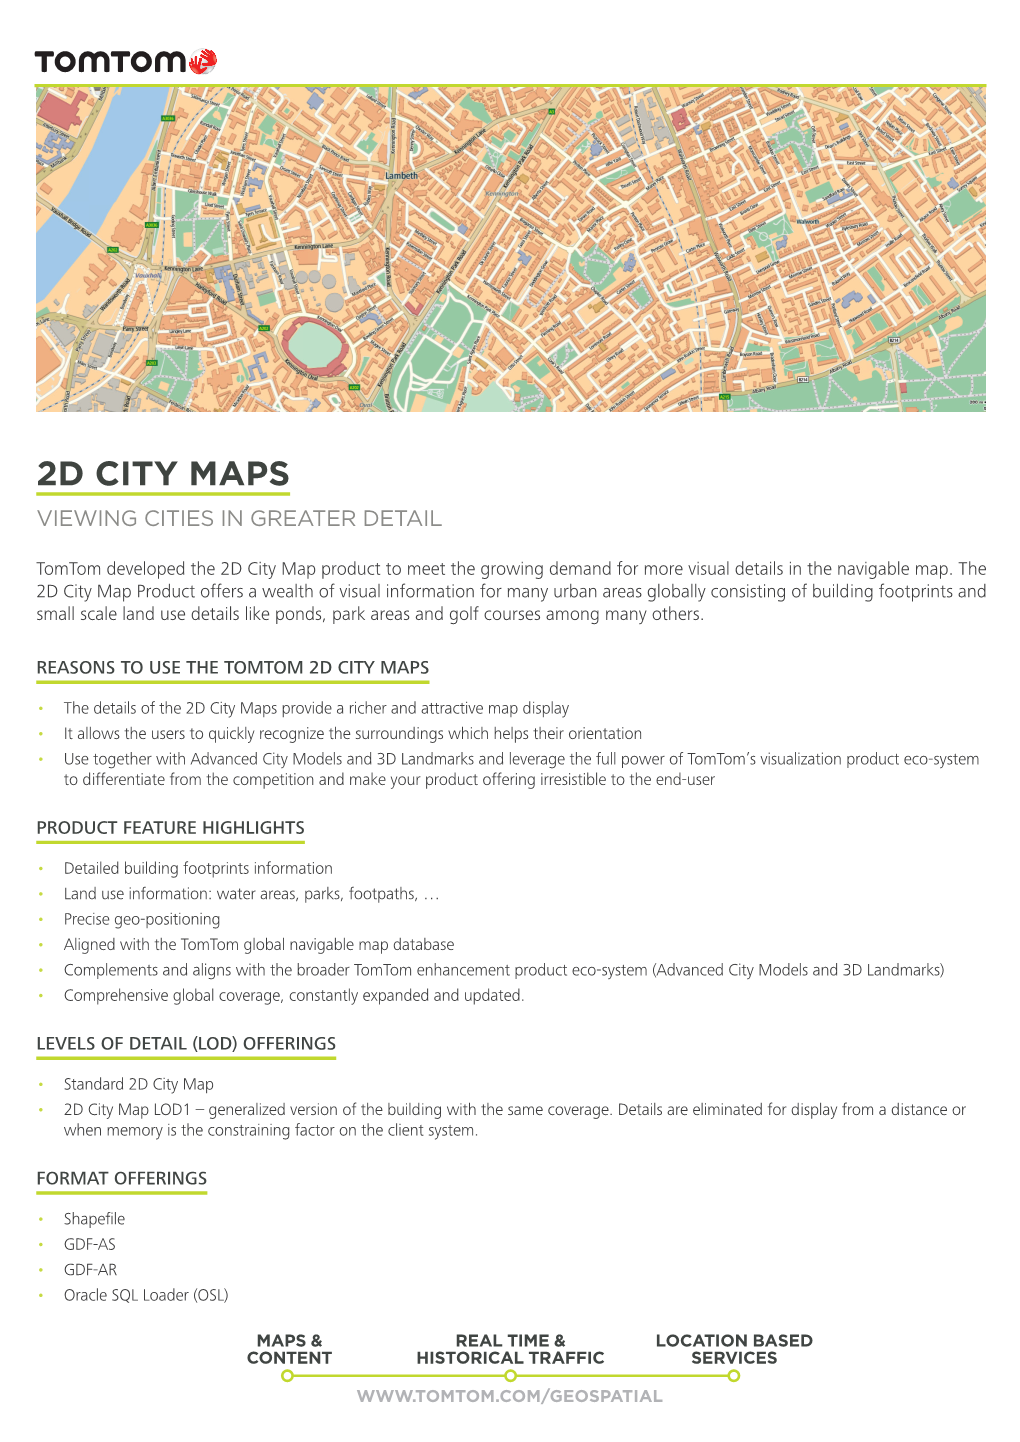 2D City Maps Viewing Cities in Greater Detail